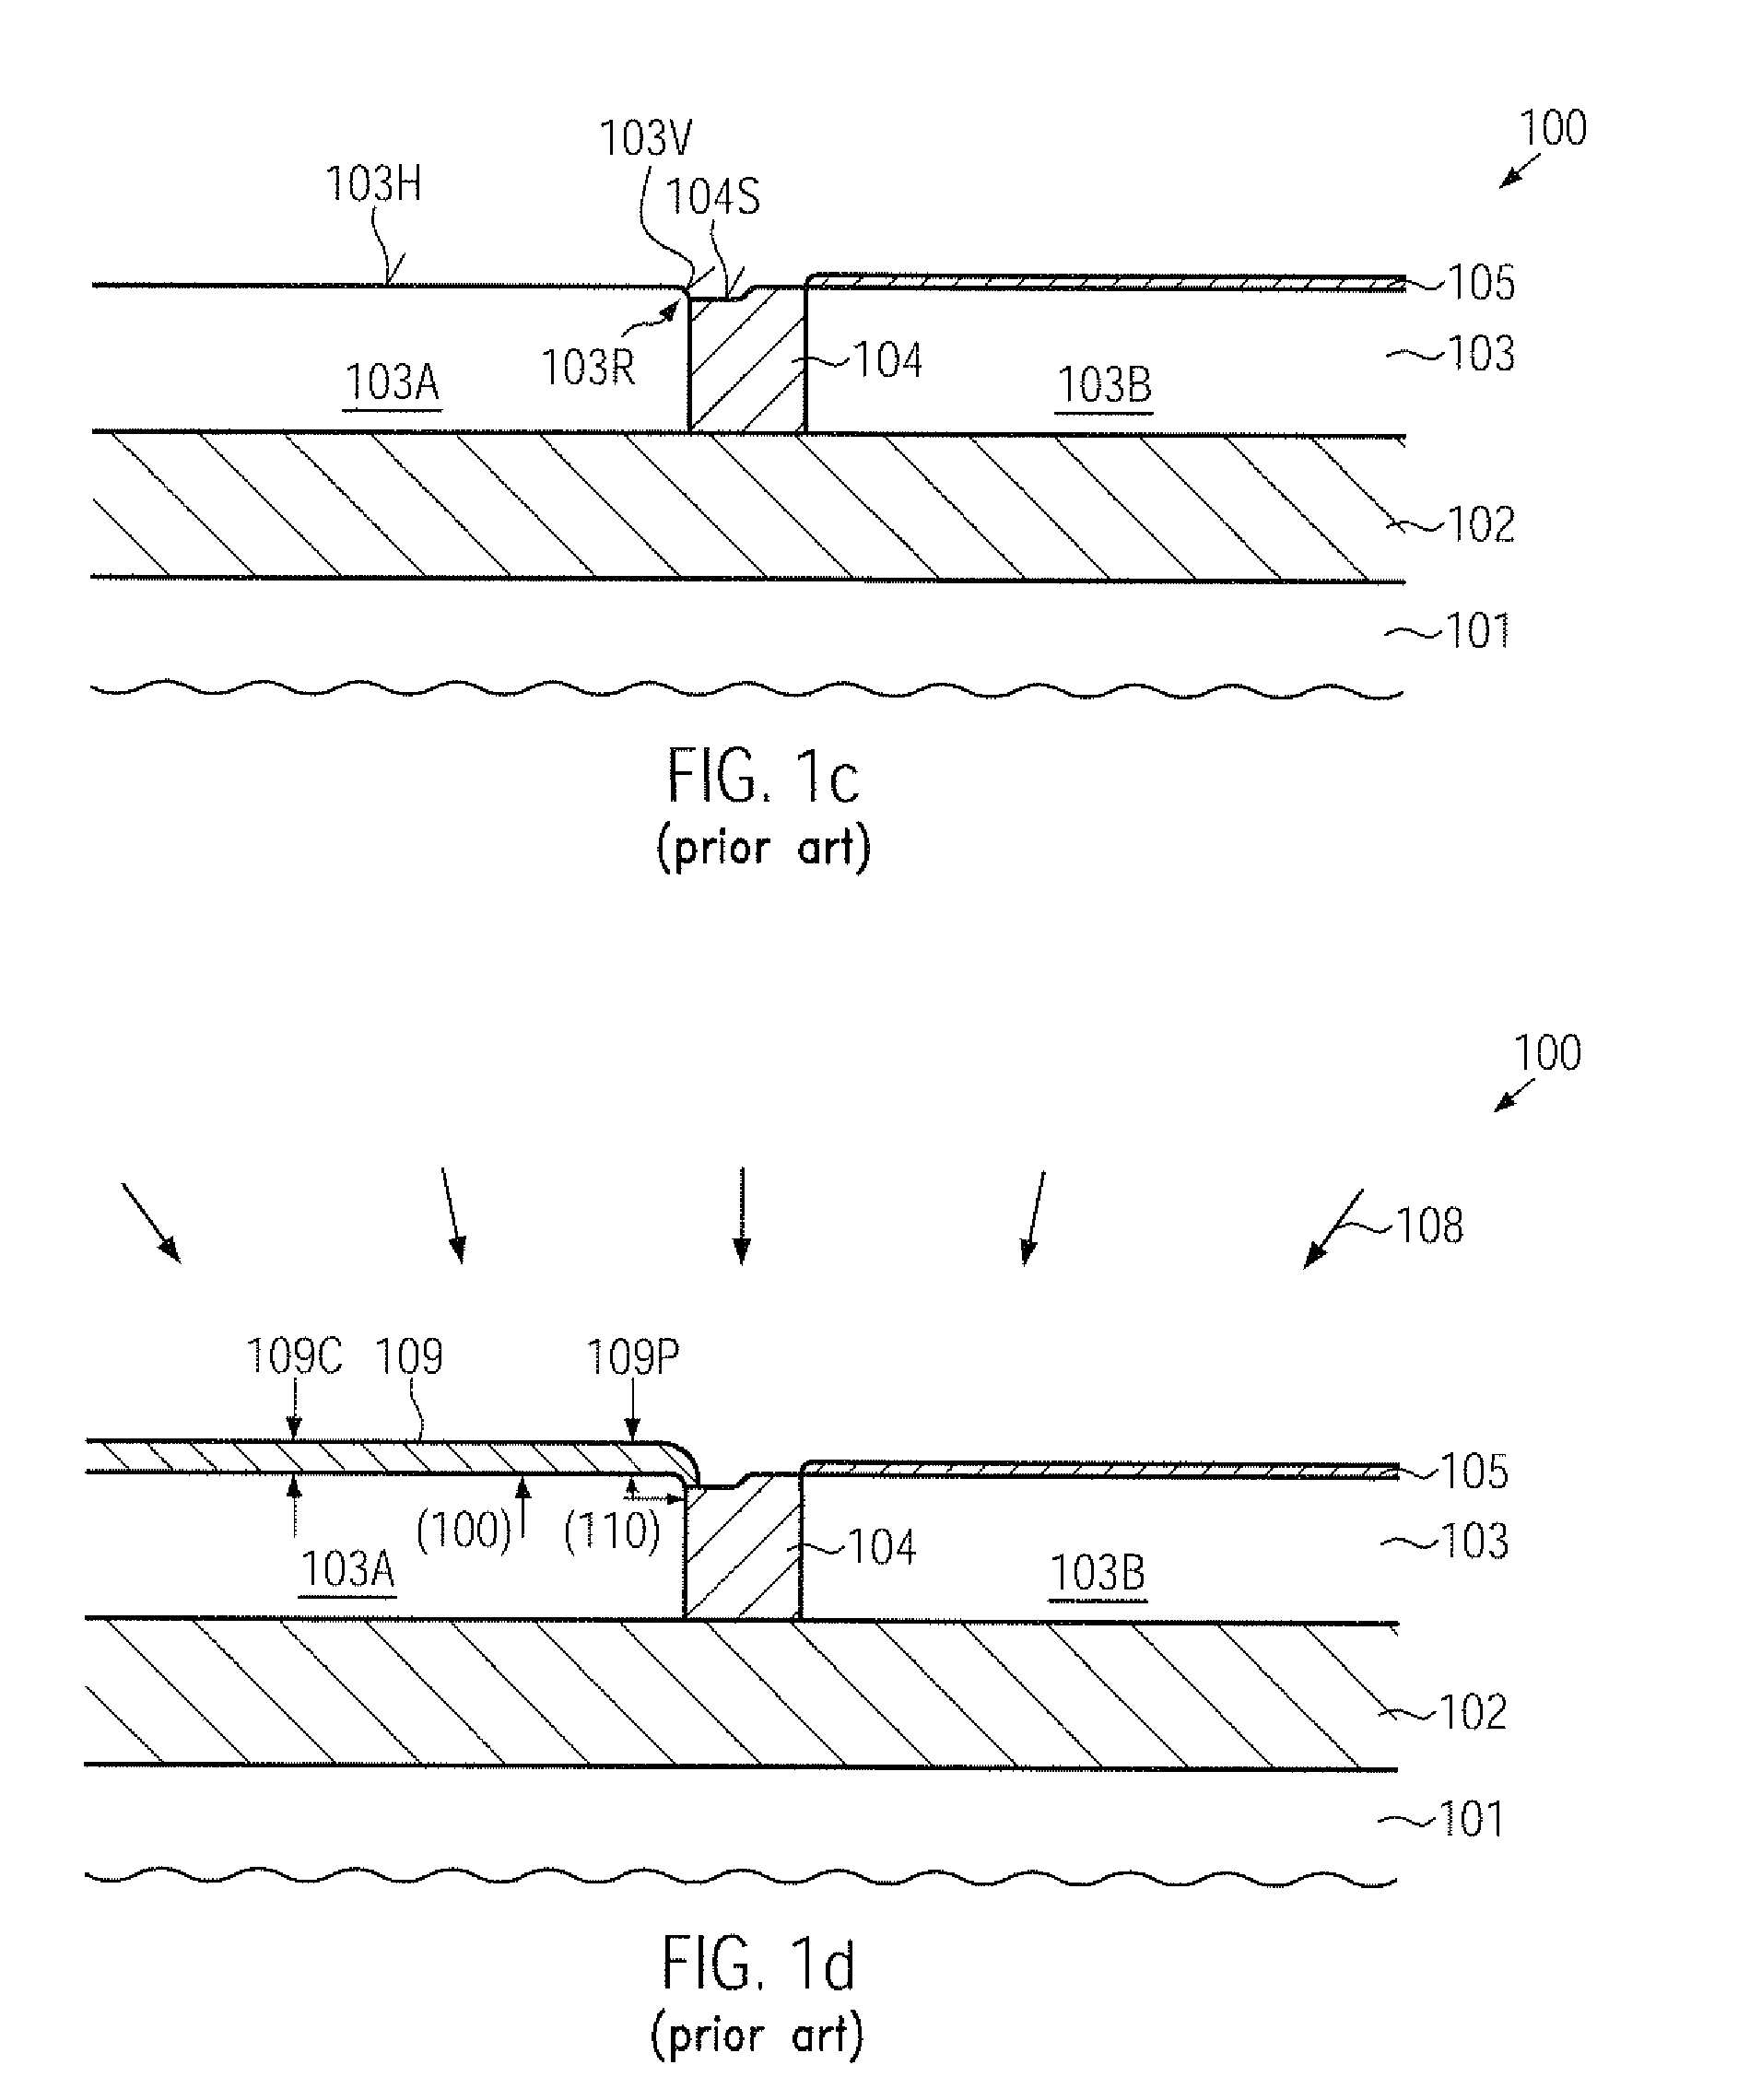 Reduction of thickness variations of a threshold semiconductor alloy by reducing patterning non-uniformities prior to depositing the semiconductor alloy